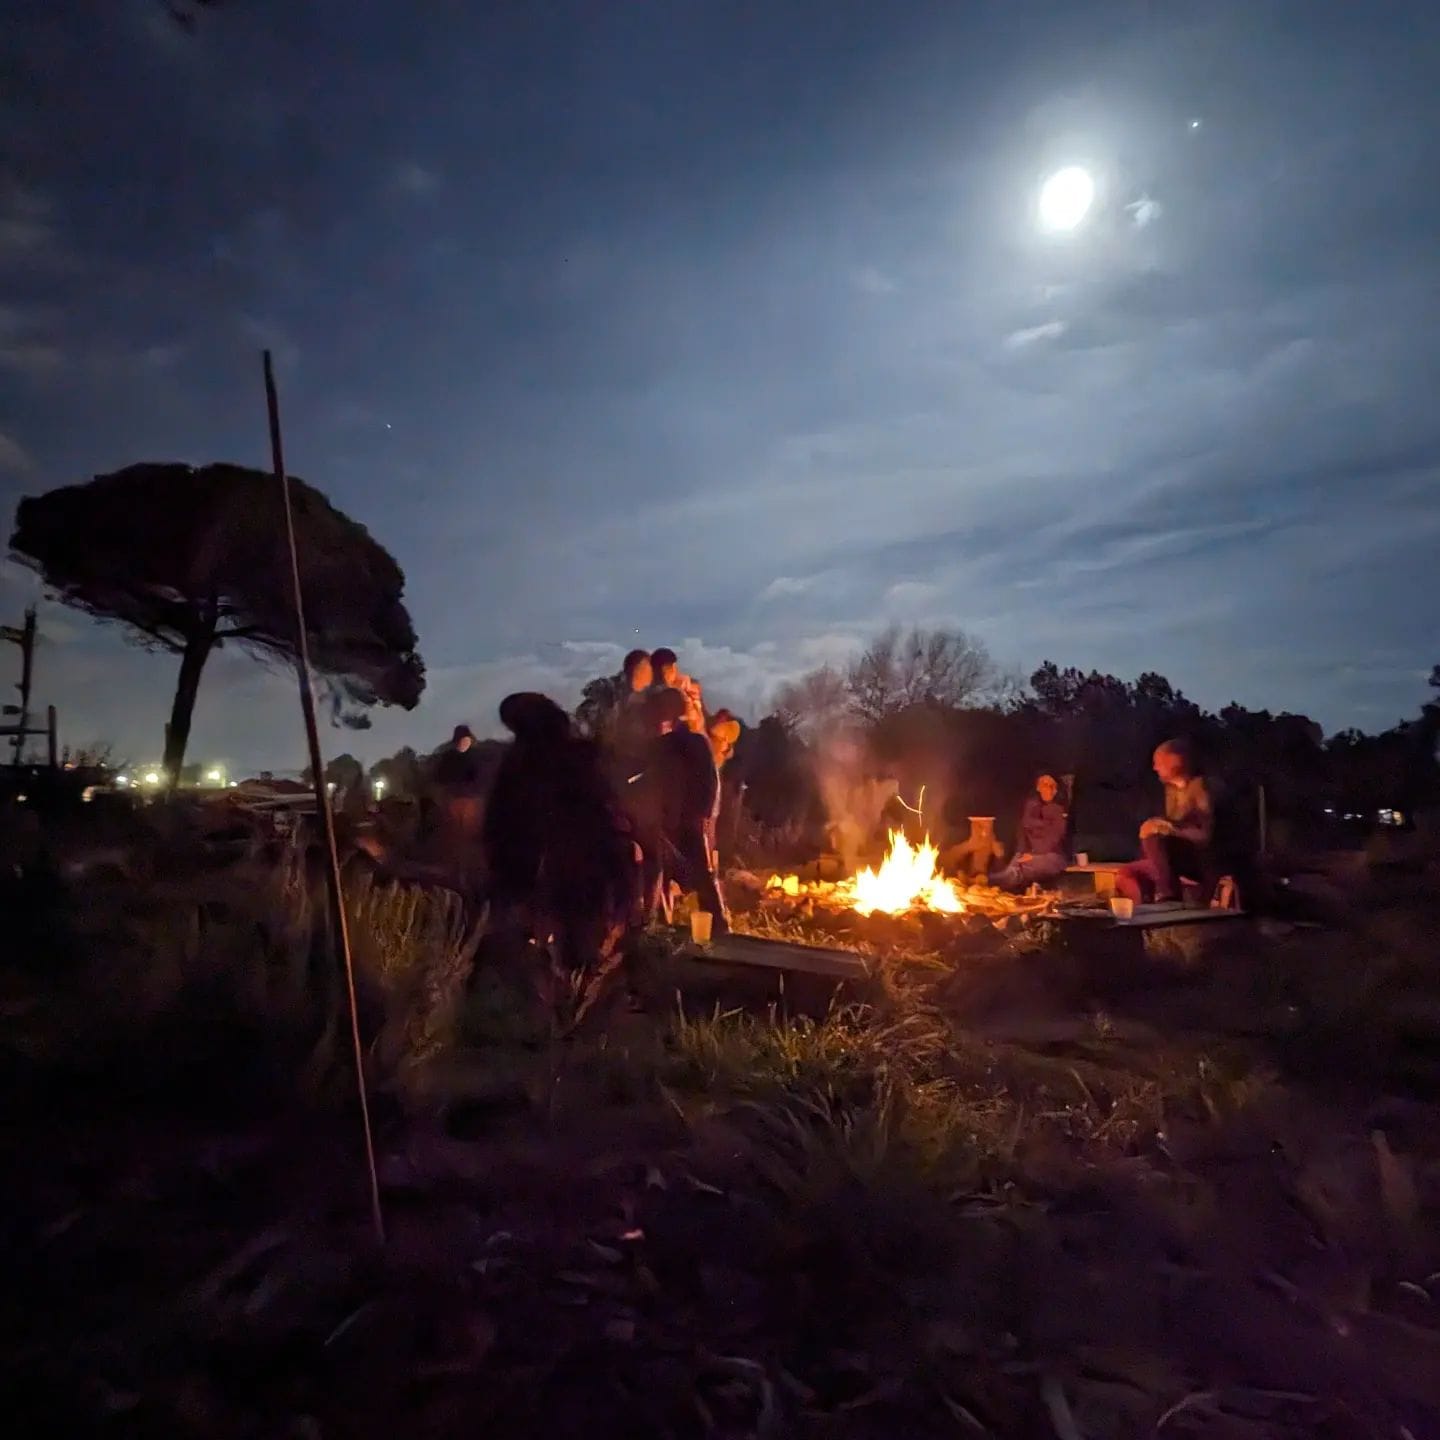 Moonlit campfire in the social circle